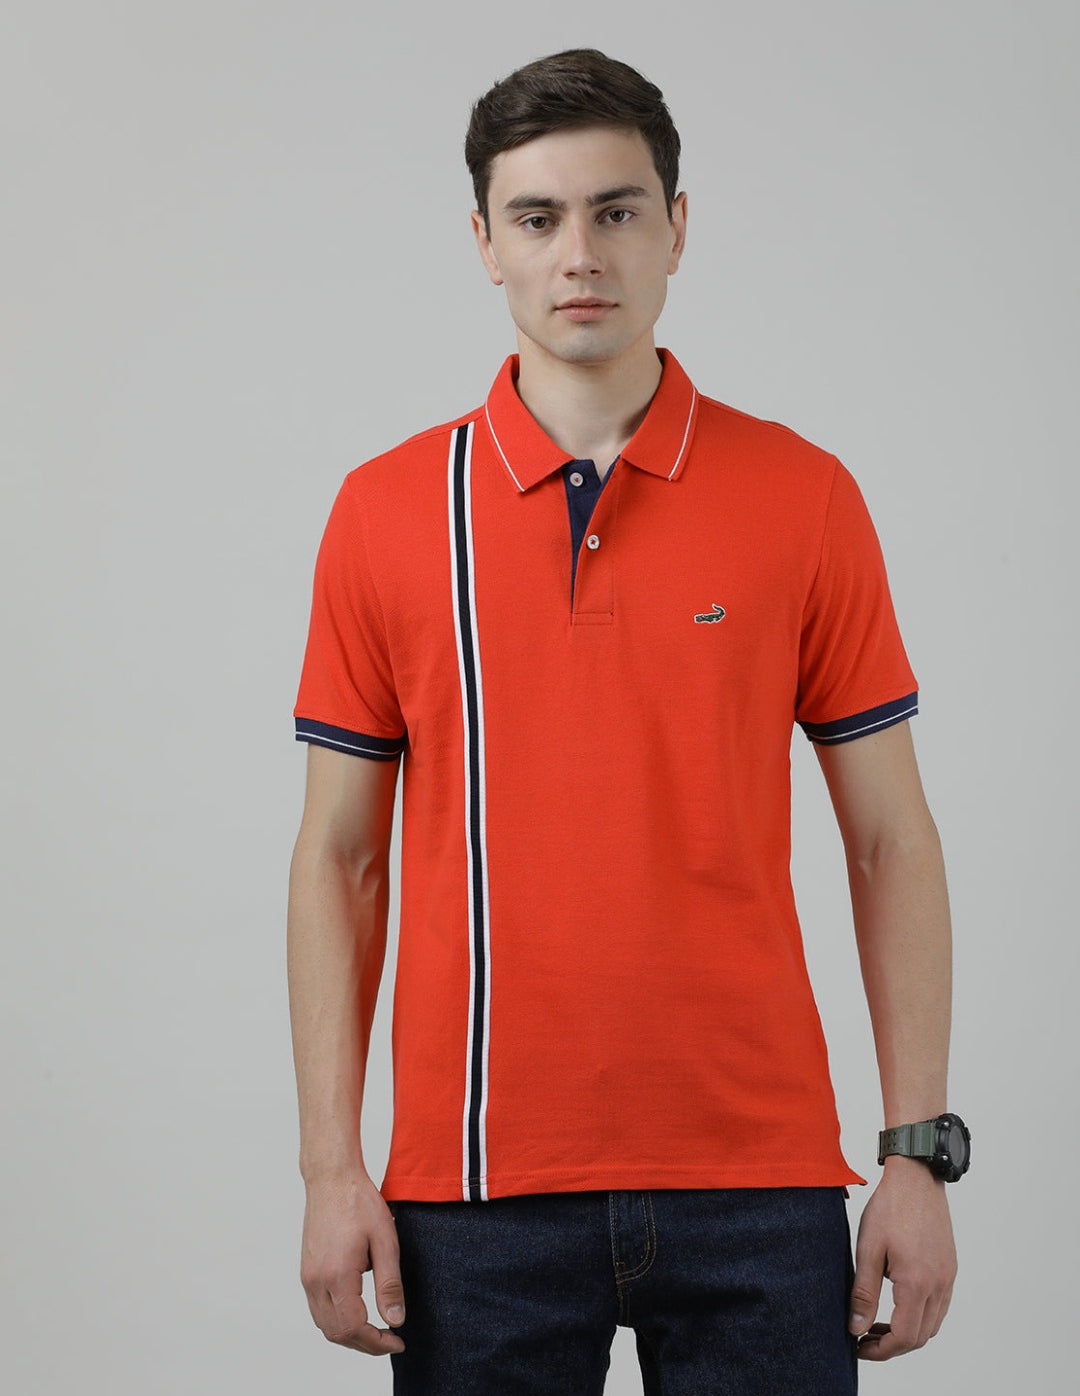 Casual Red Solid Polo T-Shirt Half Sleeve Slim Fit with Collar for Men